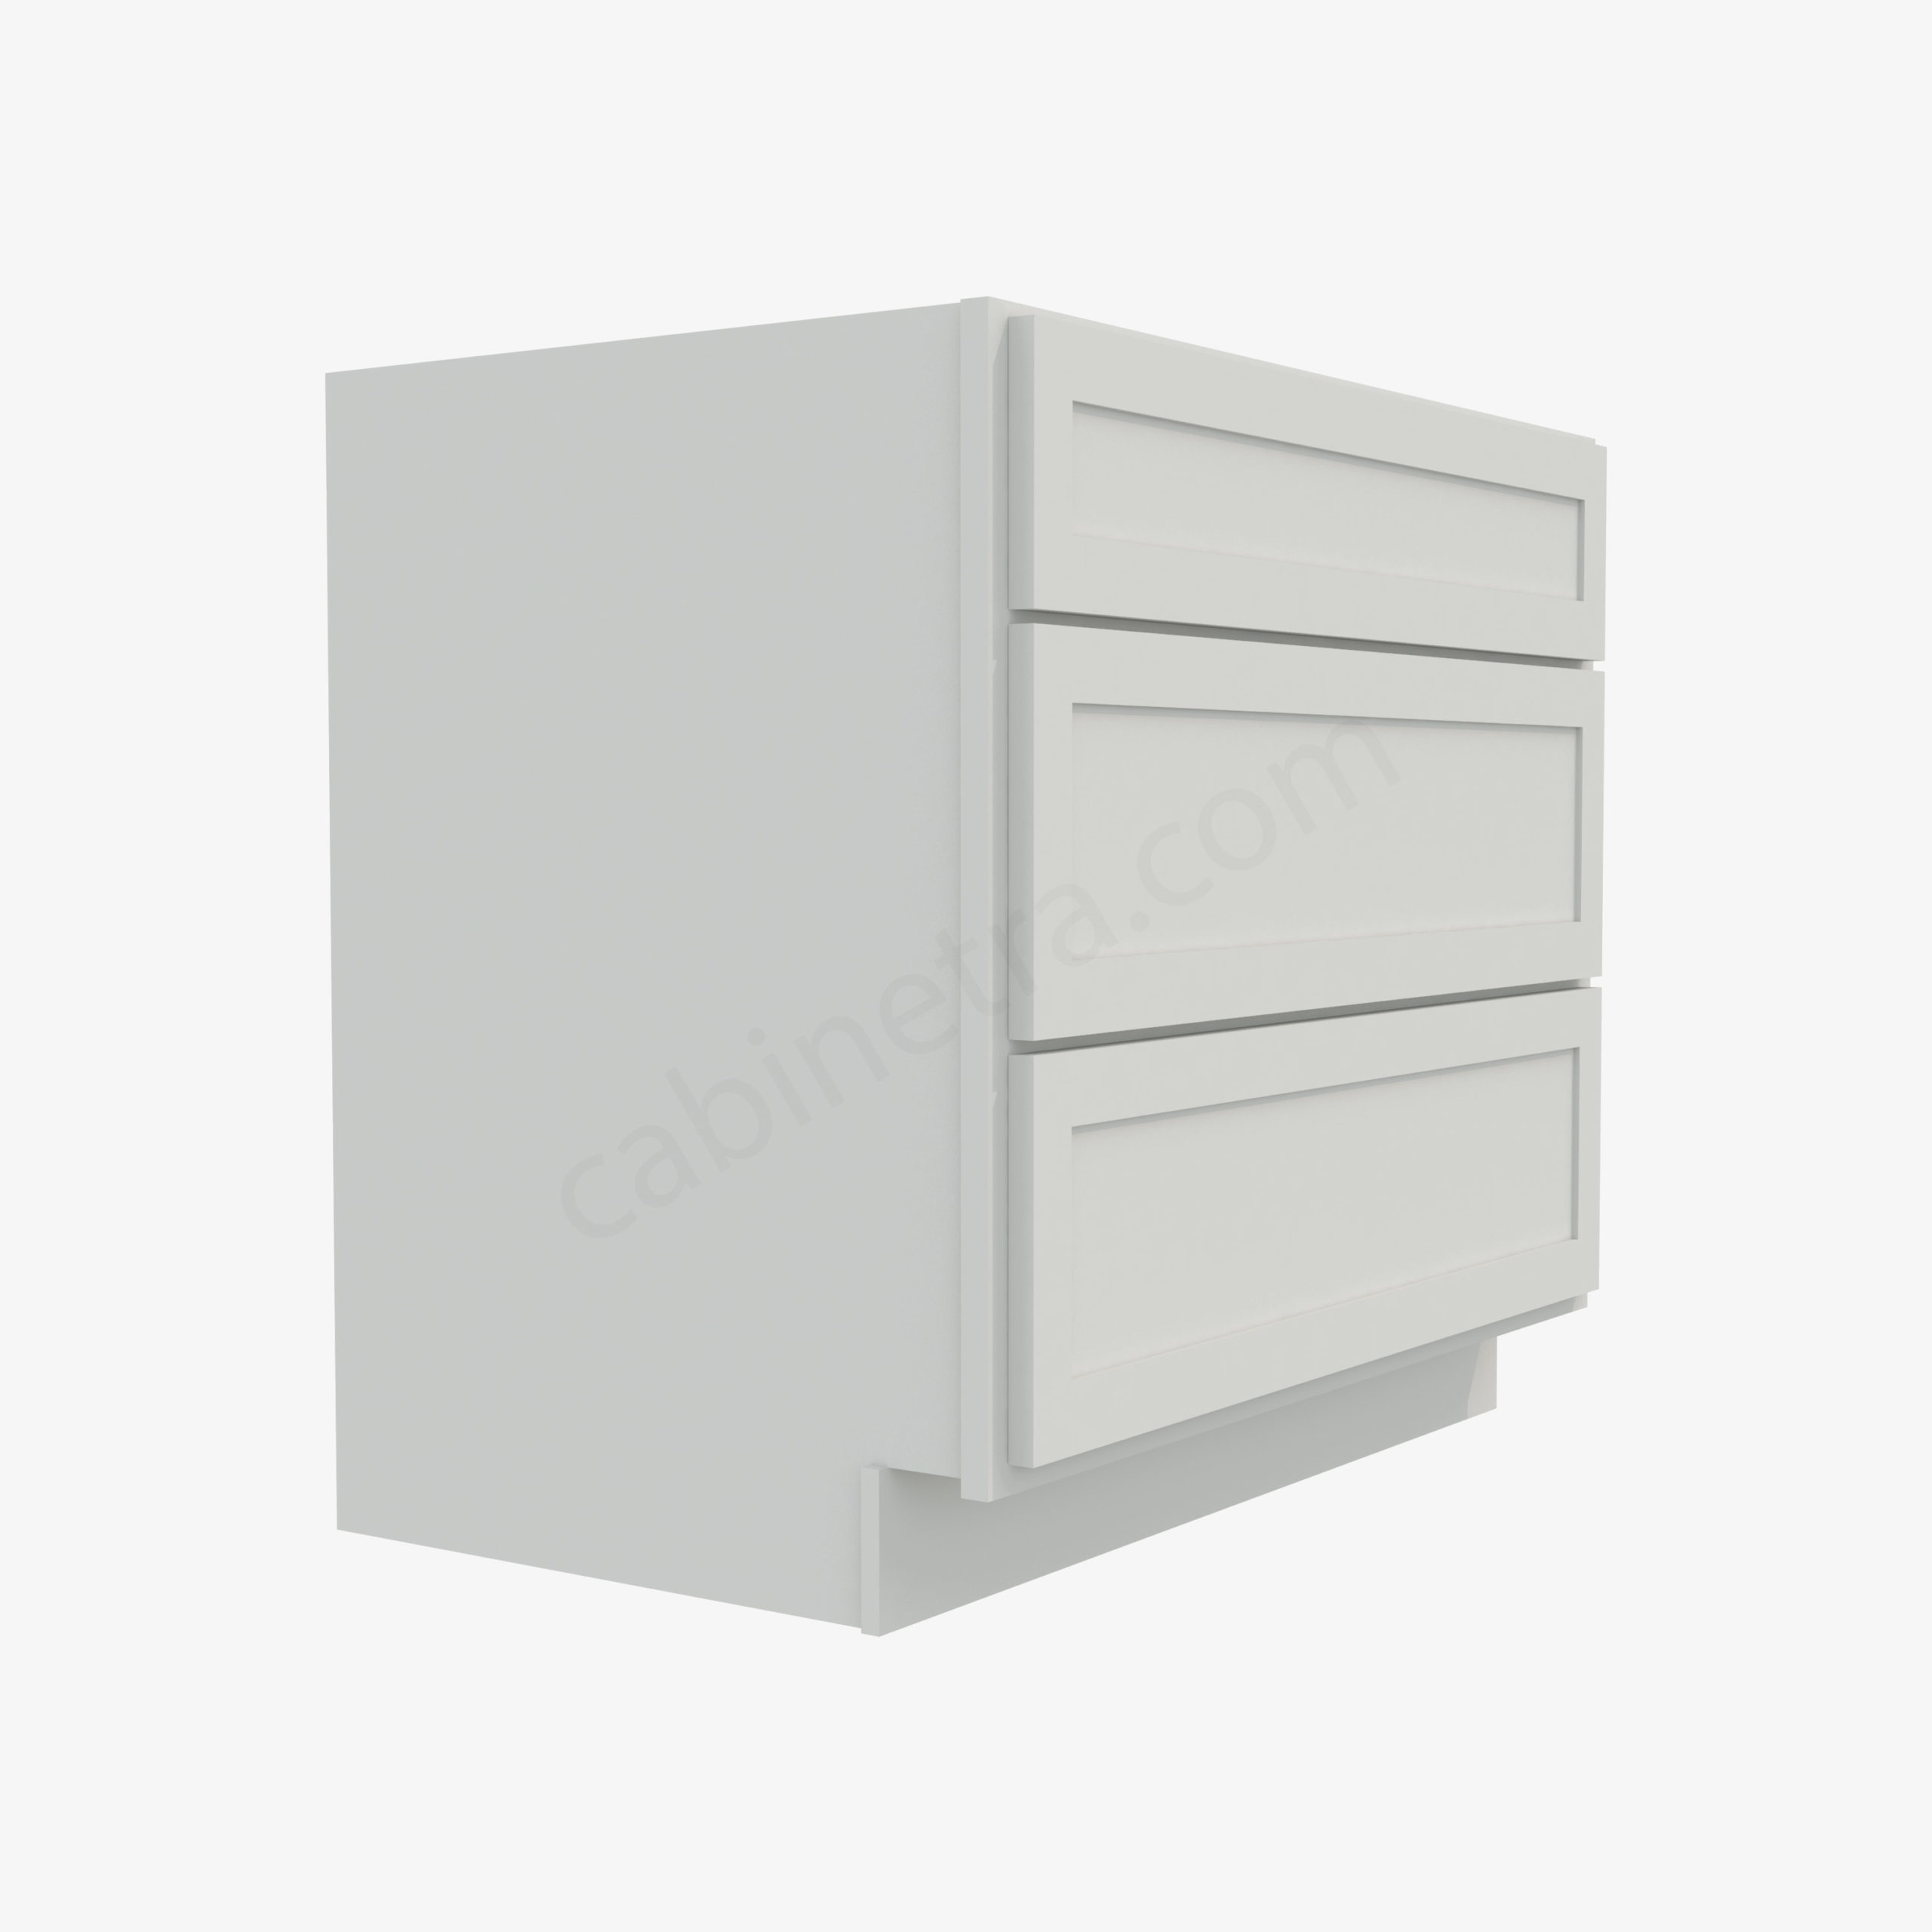 https://cabinetra.com/wp-content/uploads/2020/09/AW-DB36-4_Forevermark_Ice_White_Shaker-Cabinetra-scaled.jpg